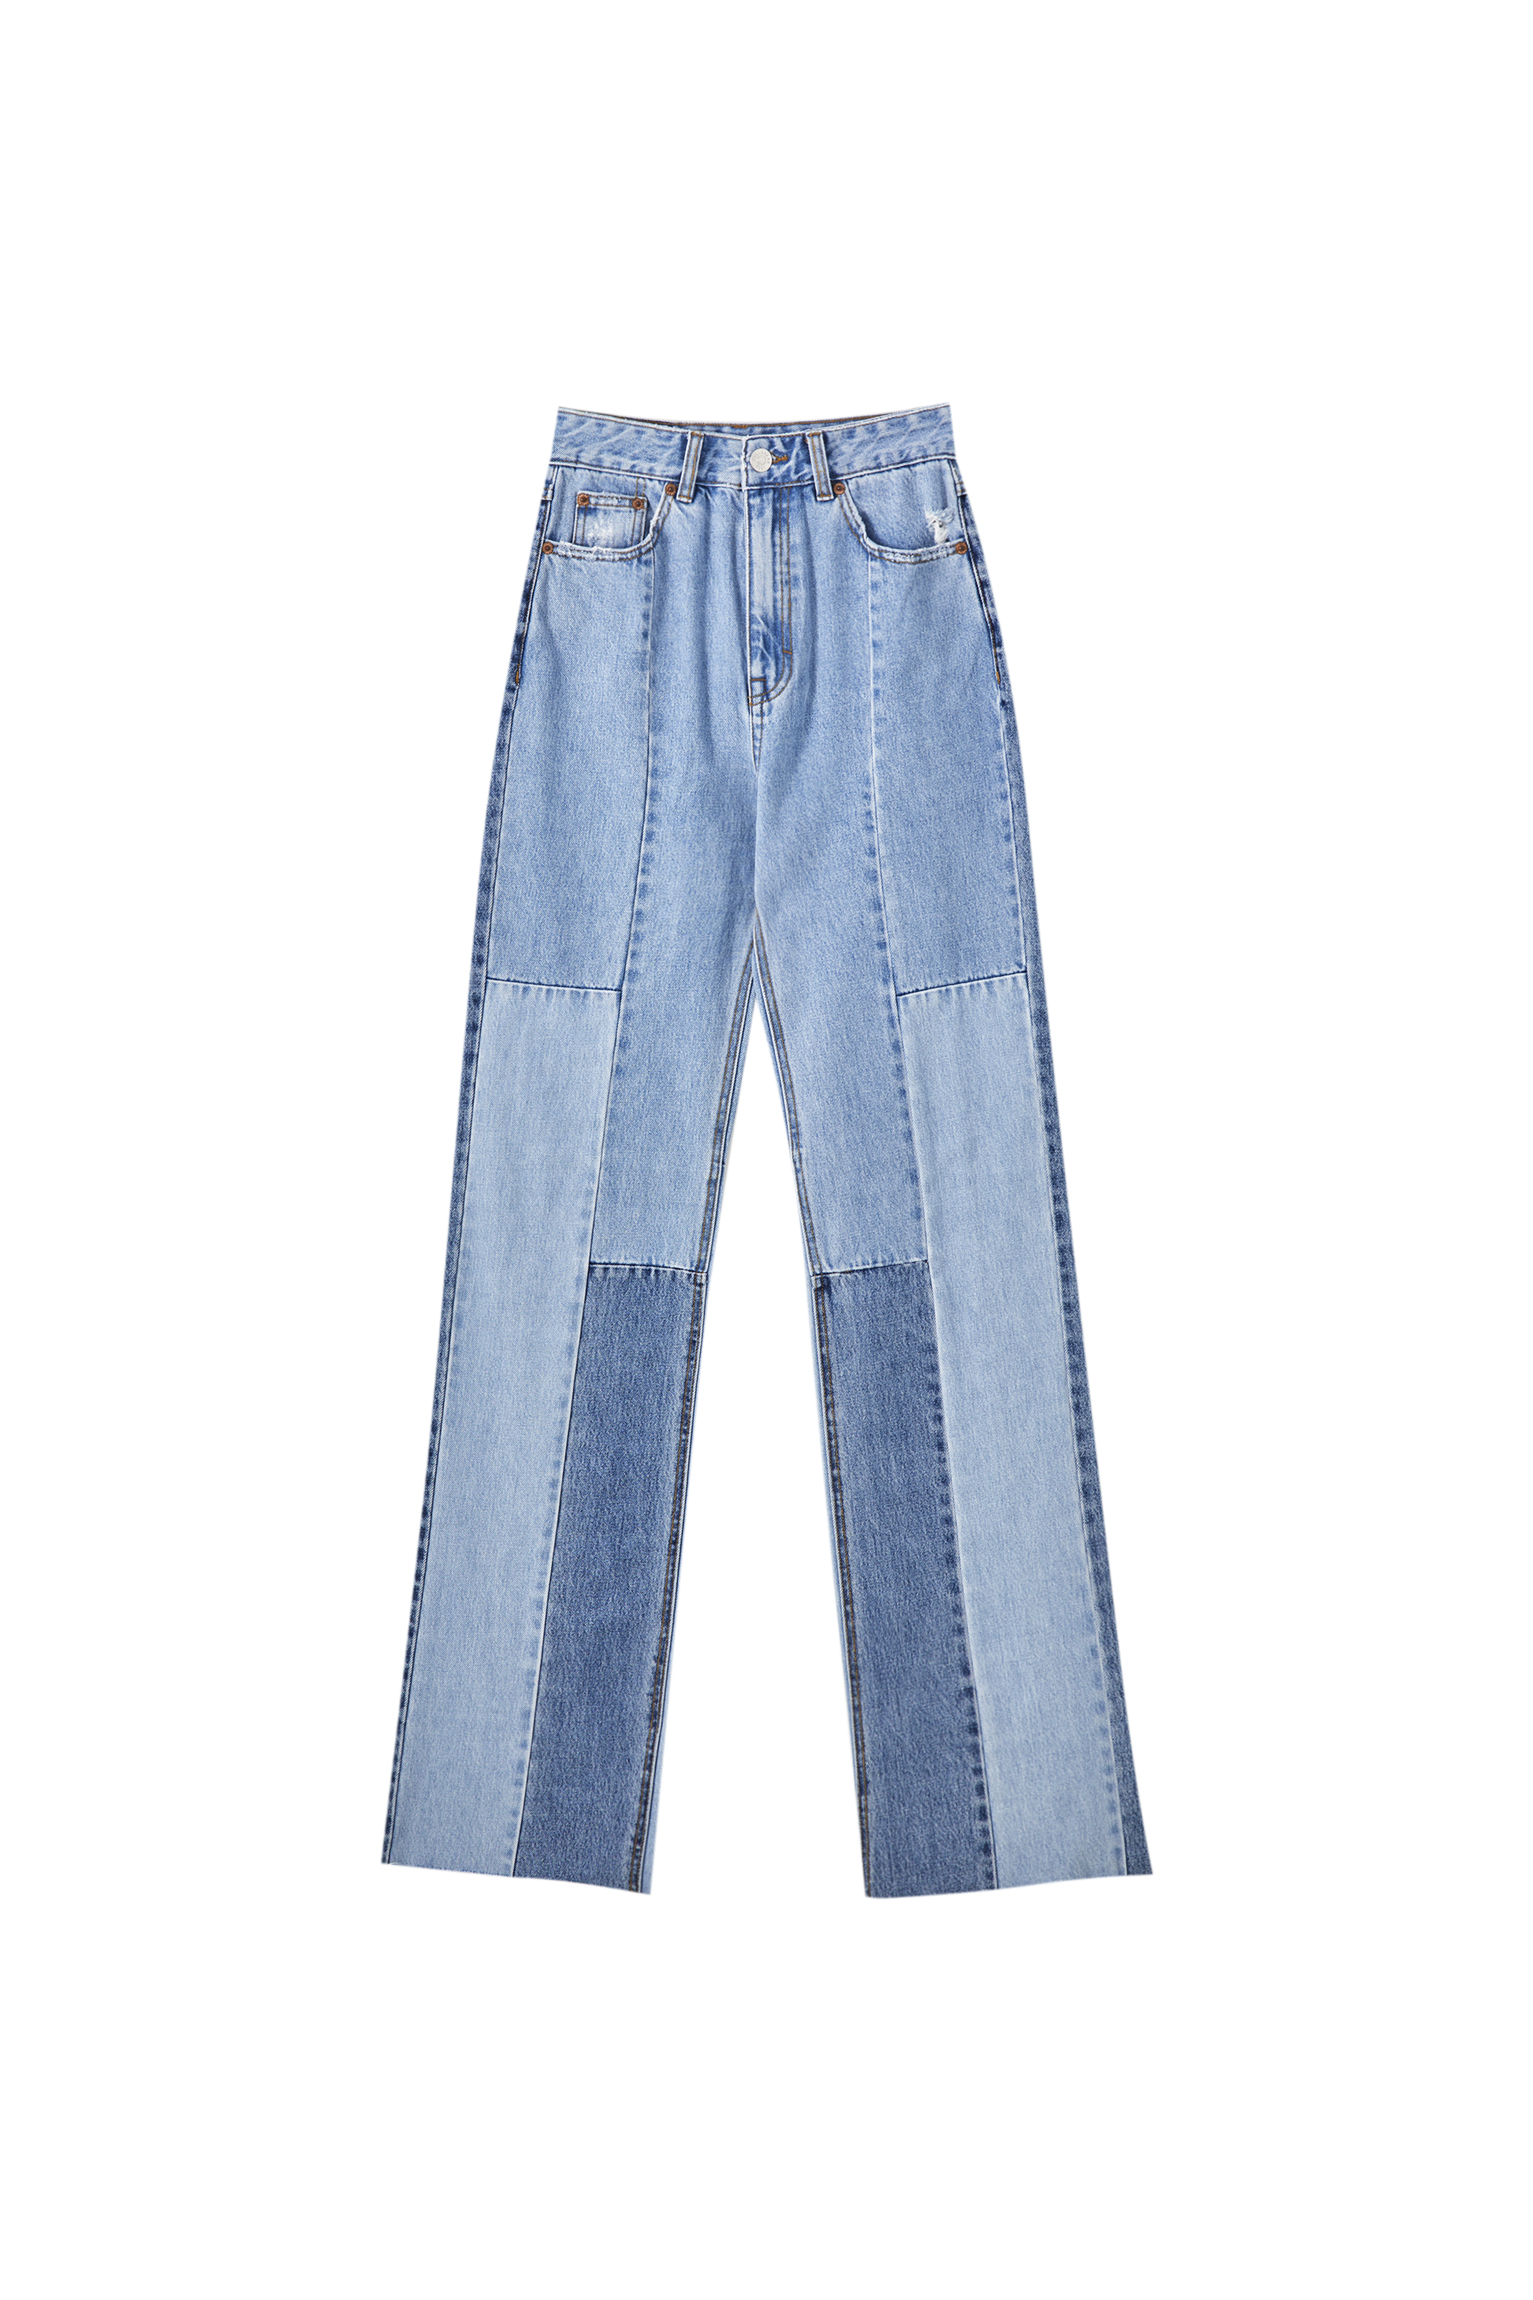 pull and bear straight leg jeans